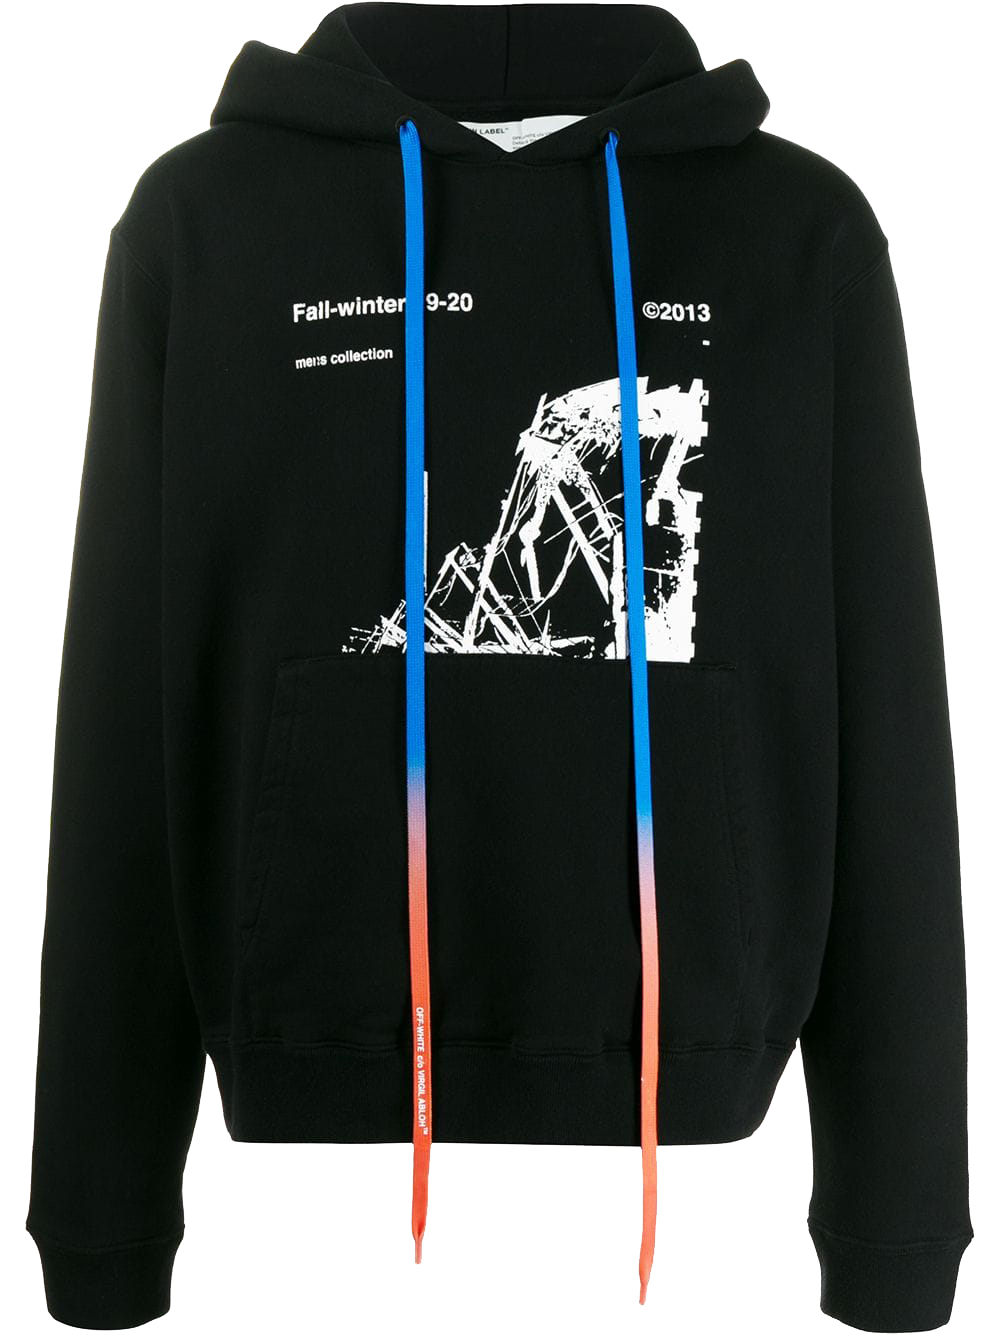 OFF-WHITE Ruined Factory Hoodie Black/White/Green